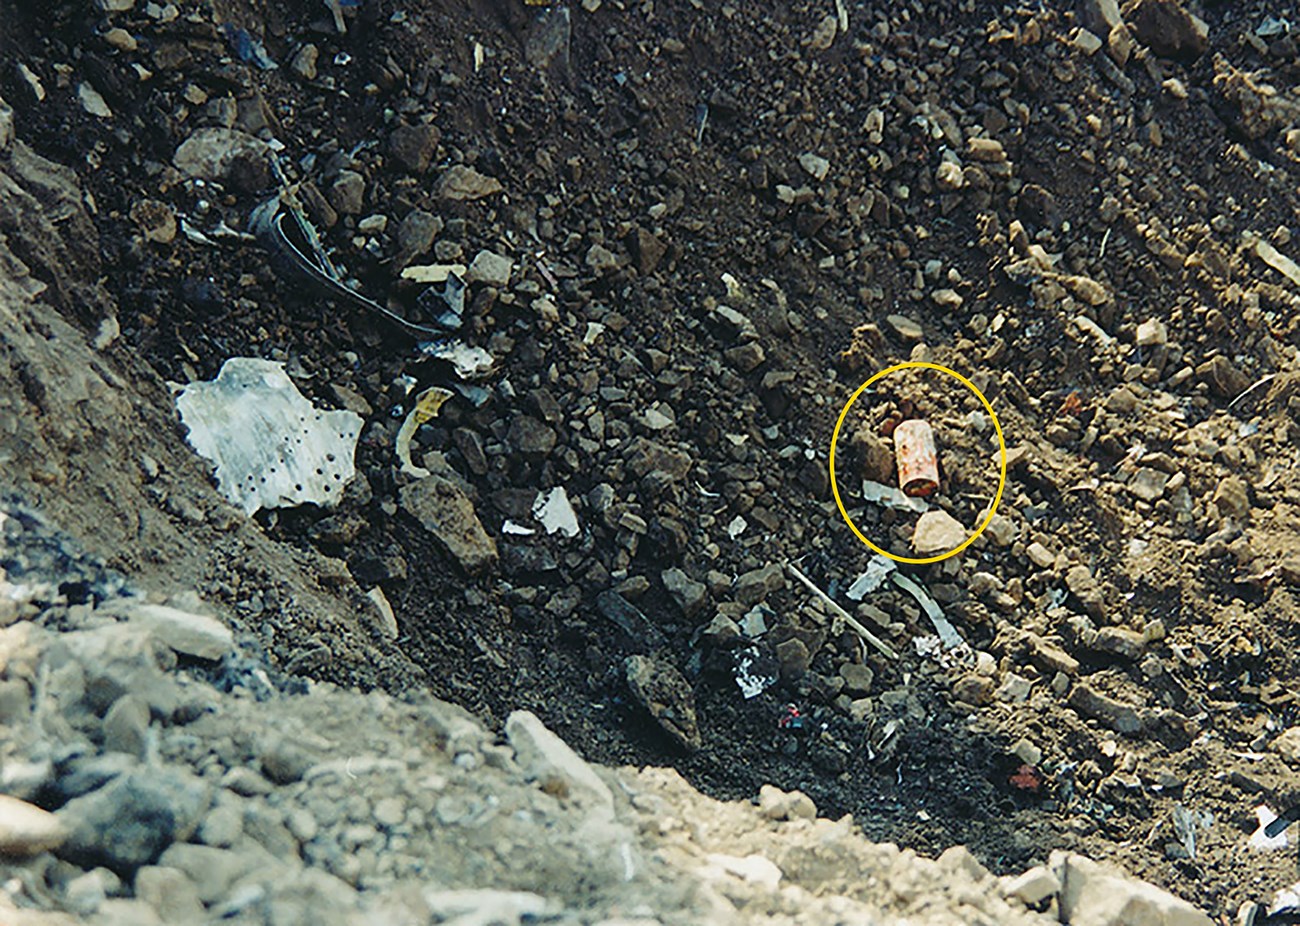 Debris, including the Flight Data Recorder is scattered near the crash site of Flight 93